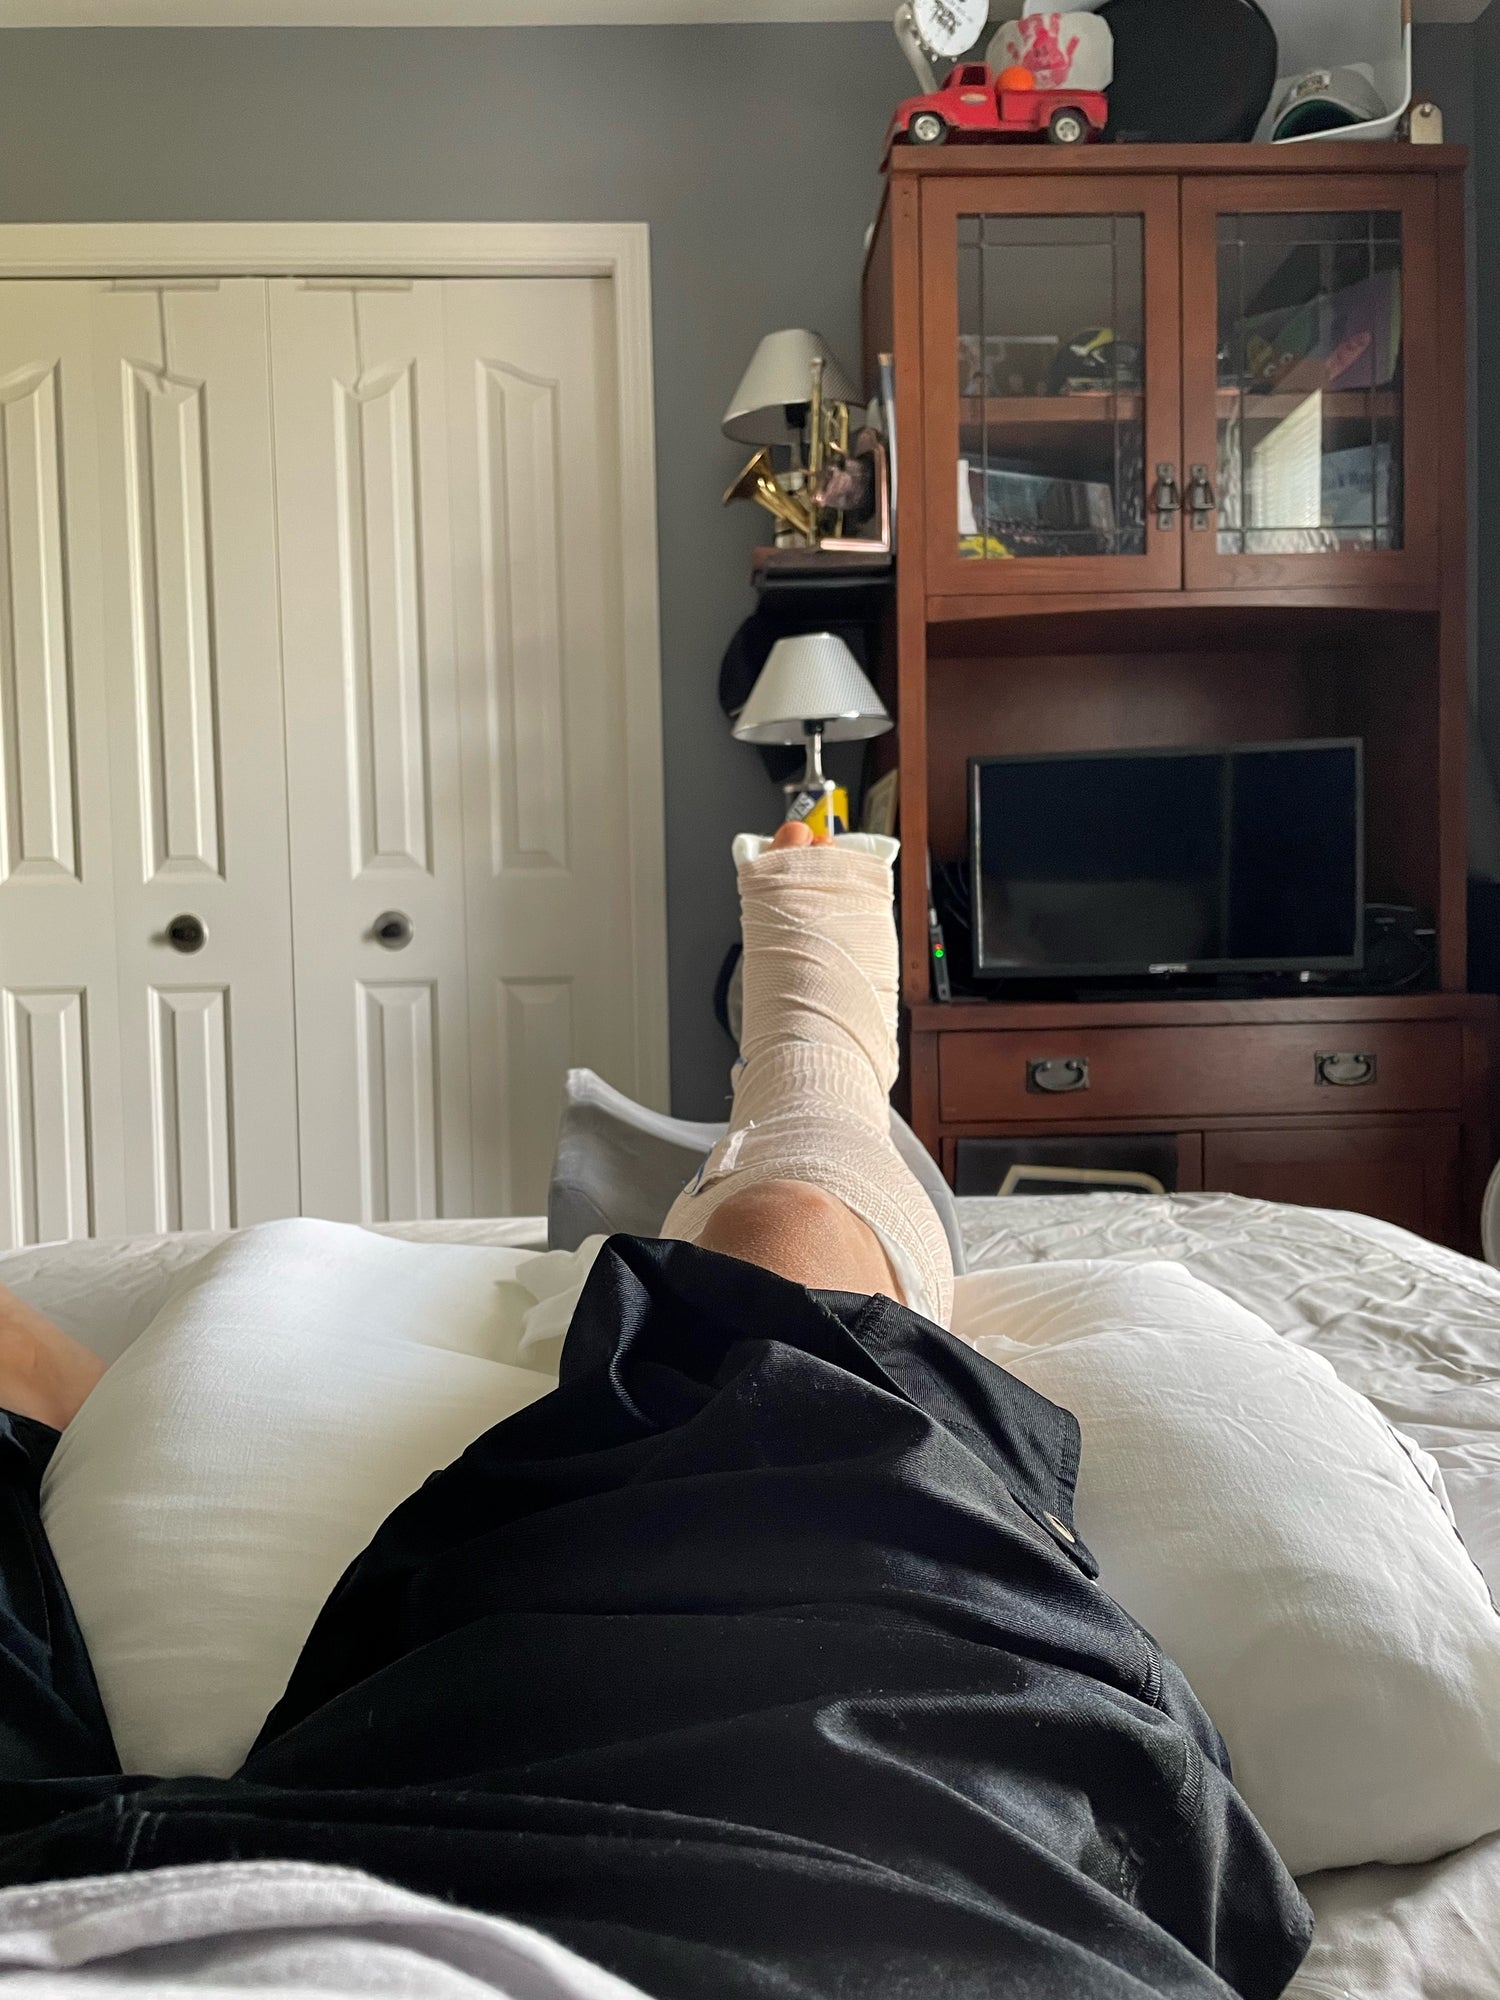 Stepping into Recovery: My Ankle Surgery Journey